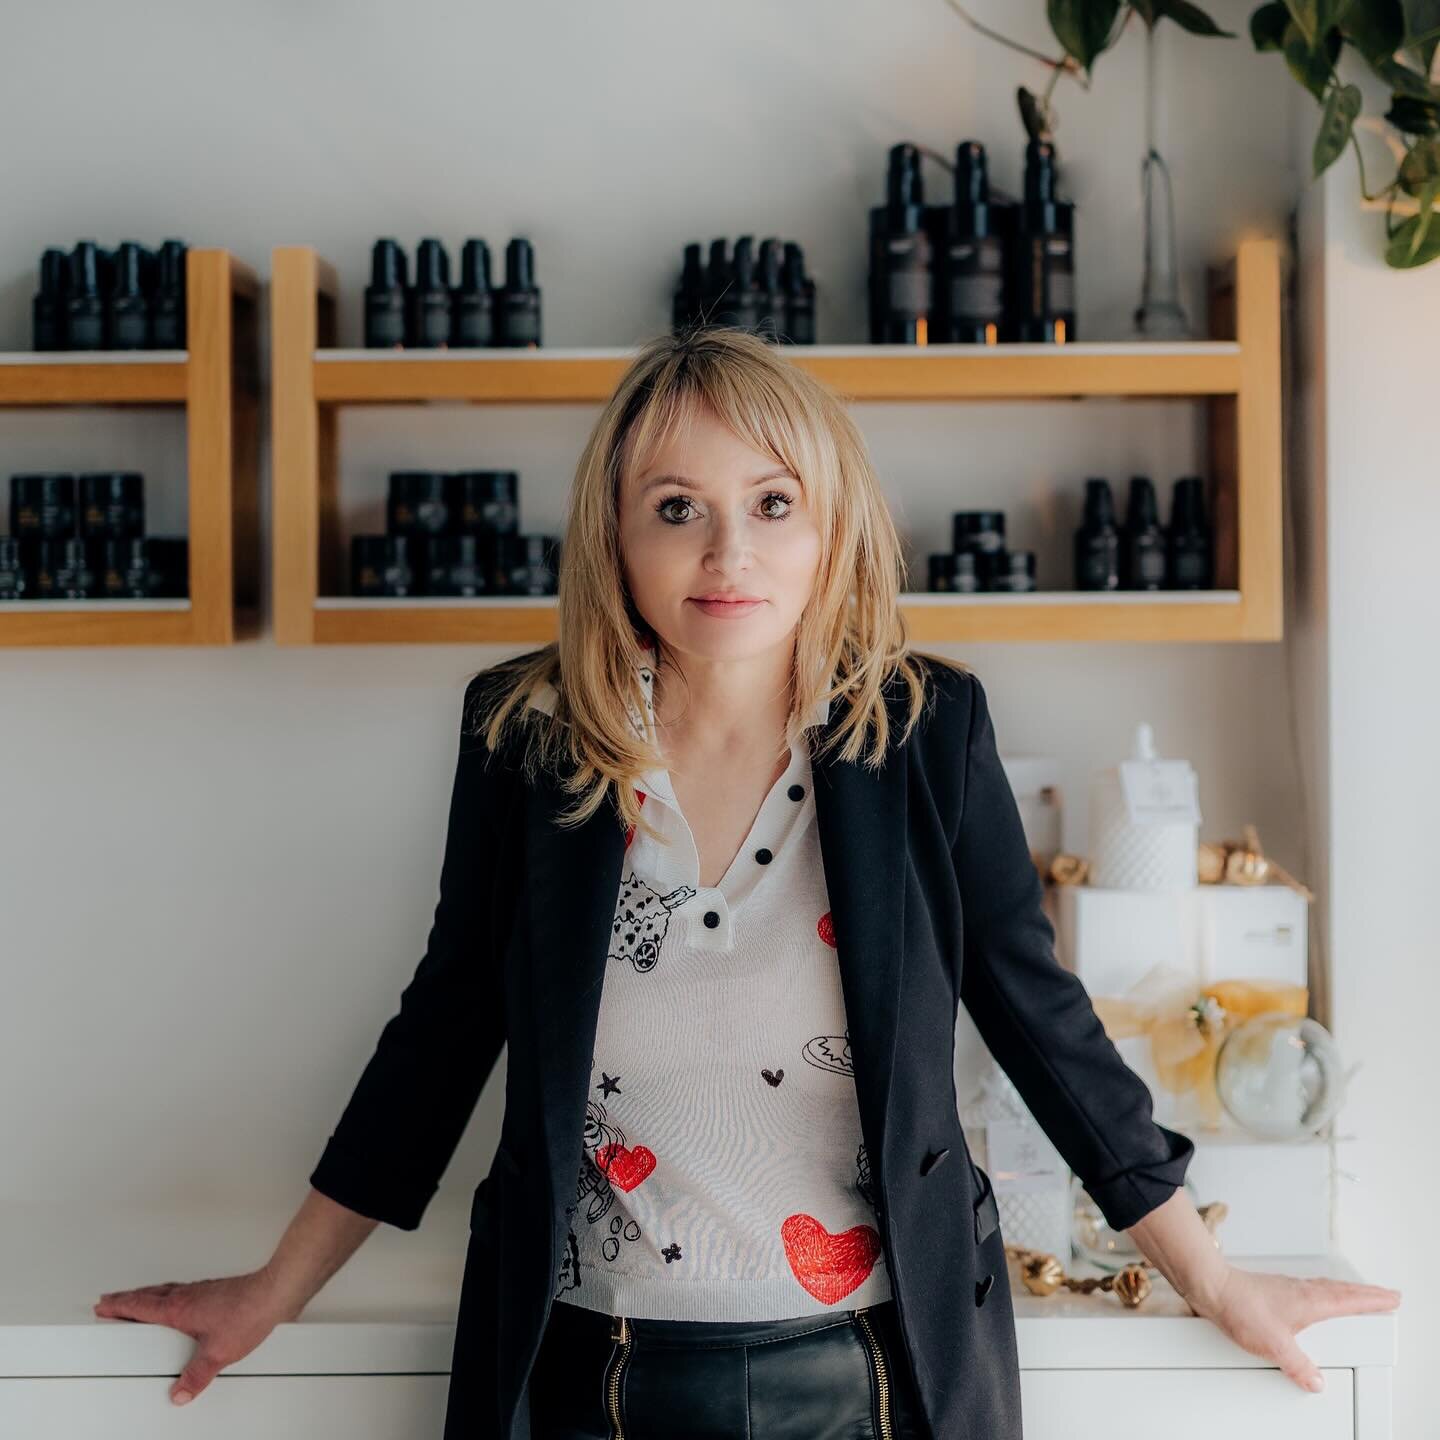 Introducing the exceptionally impressive Jody Burke, founder of medical strength skincare range - @xcellmedicalskincare 

Having worked with many of the best skincare brands not only in NZ but in the world over the last 20 years, I&rsquo;m super pick